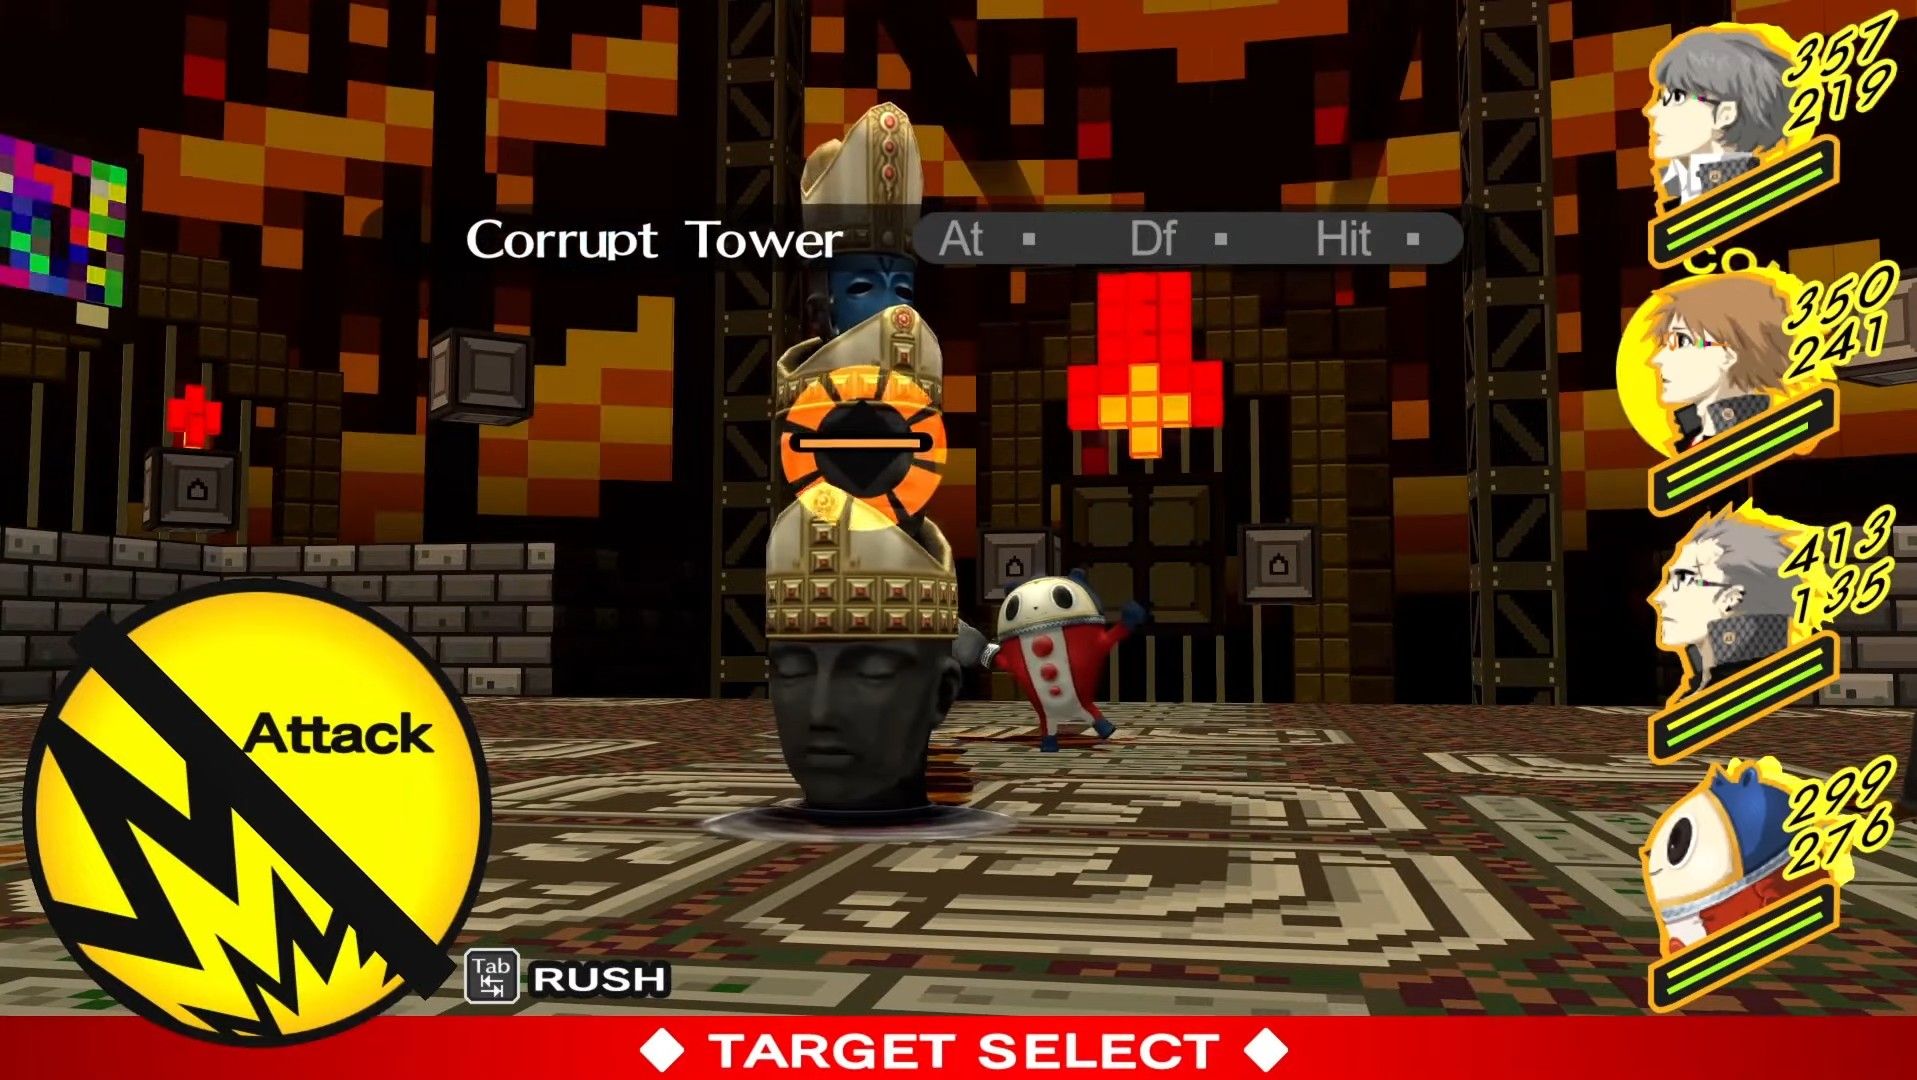 the corrupt tower shadow in battle with teddie in the background in void quest in persona 4 golden